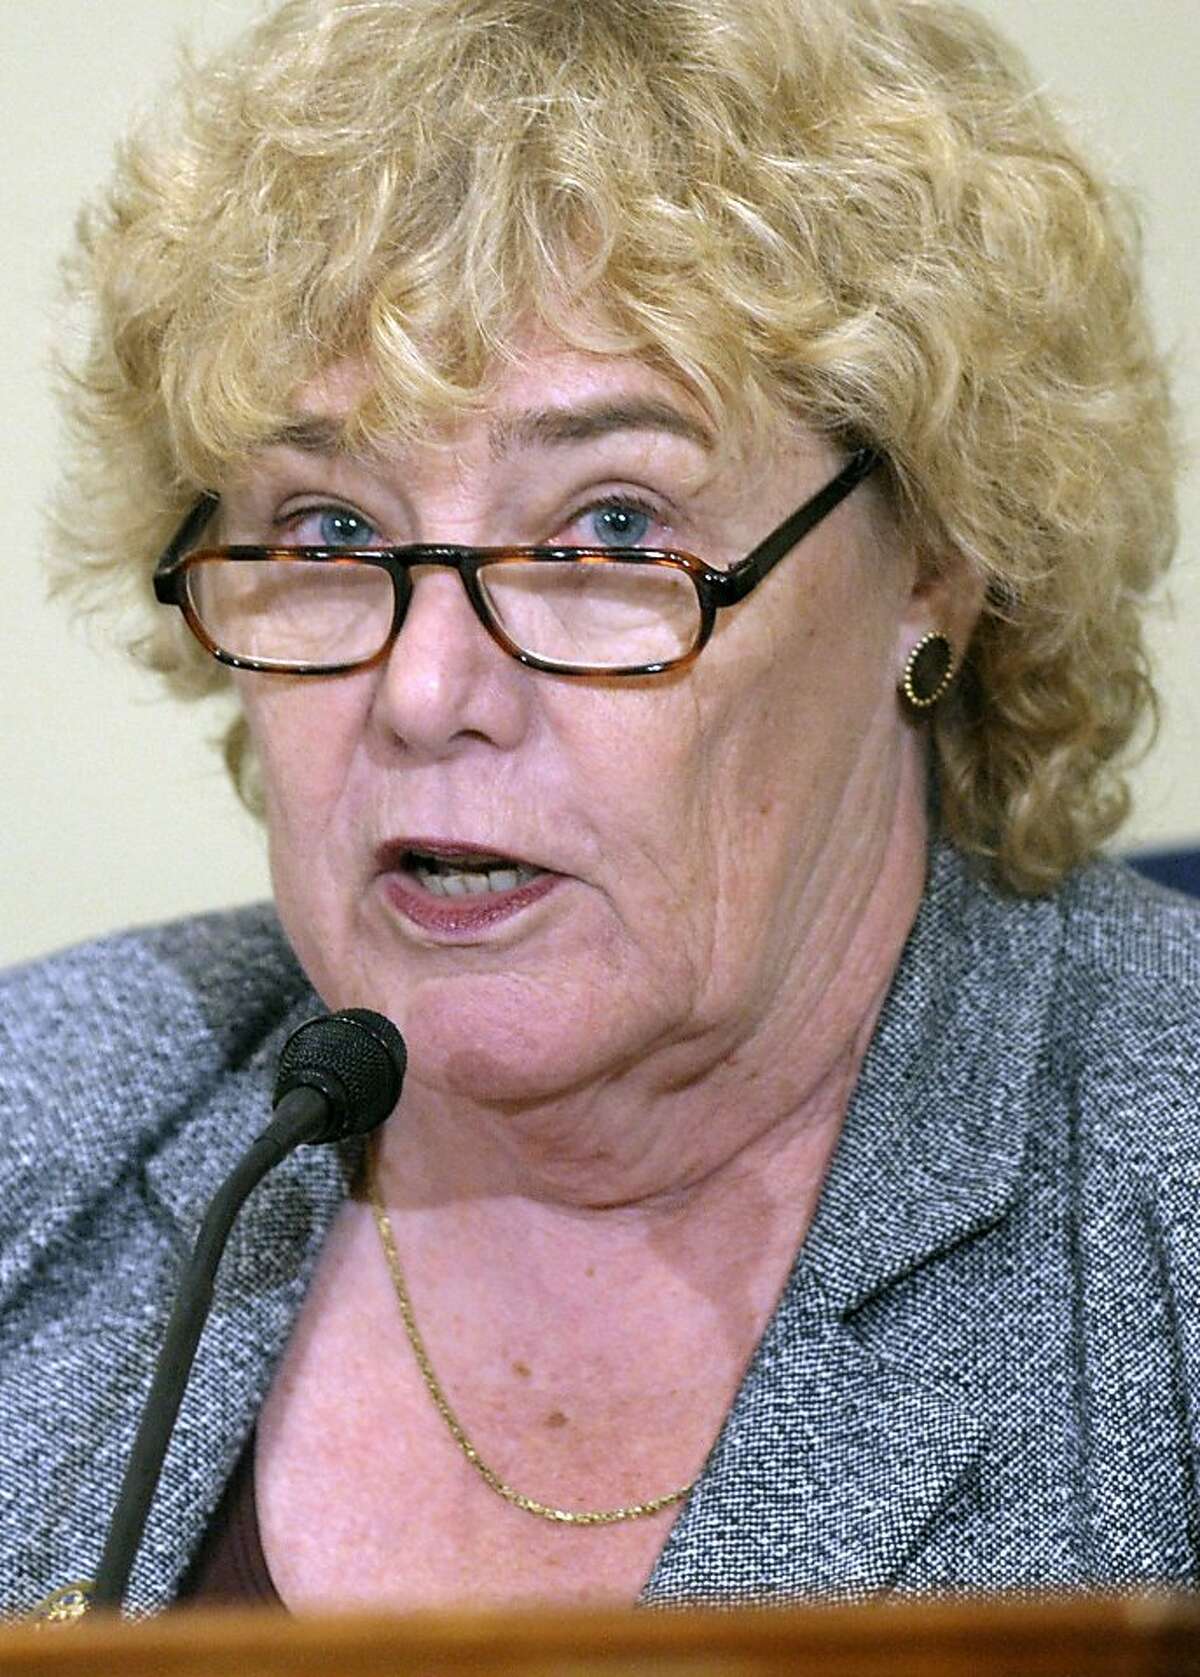 House Committee on Standards of Official Conduct Chair Rep. Zoe Lofgren, D-Calif., reads the verdict against Rep. Charles Rangel, D-N.Y., on Capitol Hill in Washington, Tuesday, Nov. 16, 2010. Rangel, once one of the most influential House members, was convicted Tuesday on 11 counts of breaking ethics rules and now faces punishment. (AP Photo/Cliff Owen Ran on: 02-28-2011 Zoe Lofgren, D-San Jose, and Wally Herger, R-Marysville, both voted for a Brazilian cotton subsidy. Ran on: 02-28-2011 Zoe Lofgren, D-San Jose, and Wally Herger, R-Marysville, both voted for a Brazilian cotton subsidy.